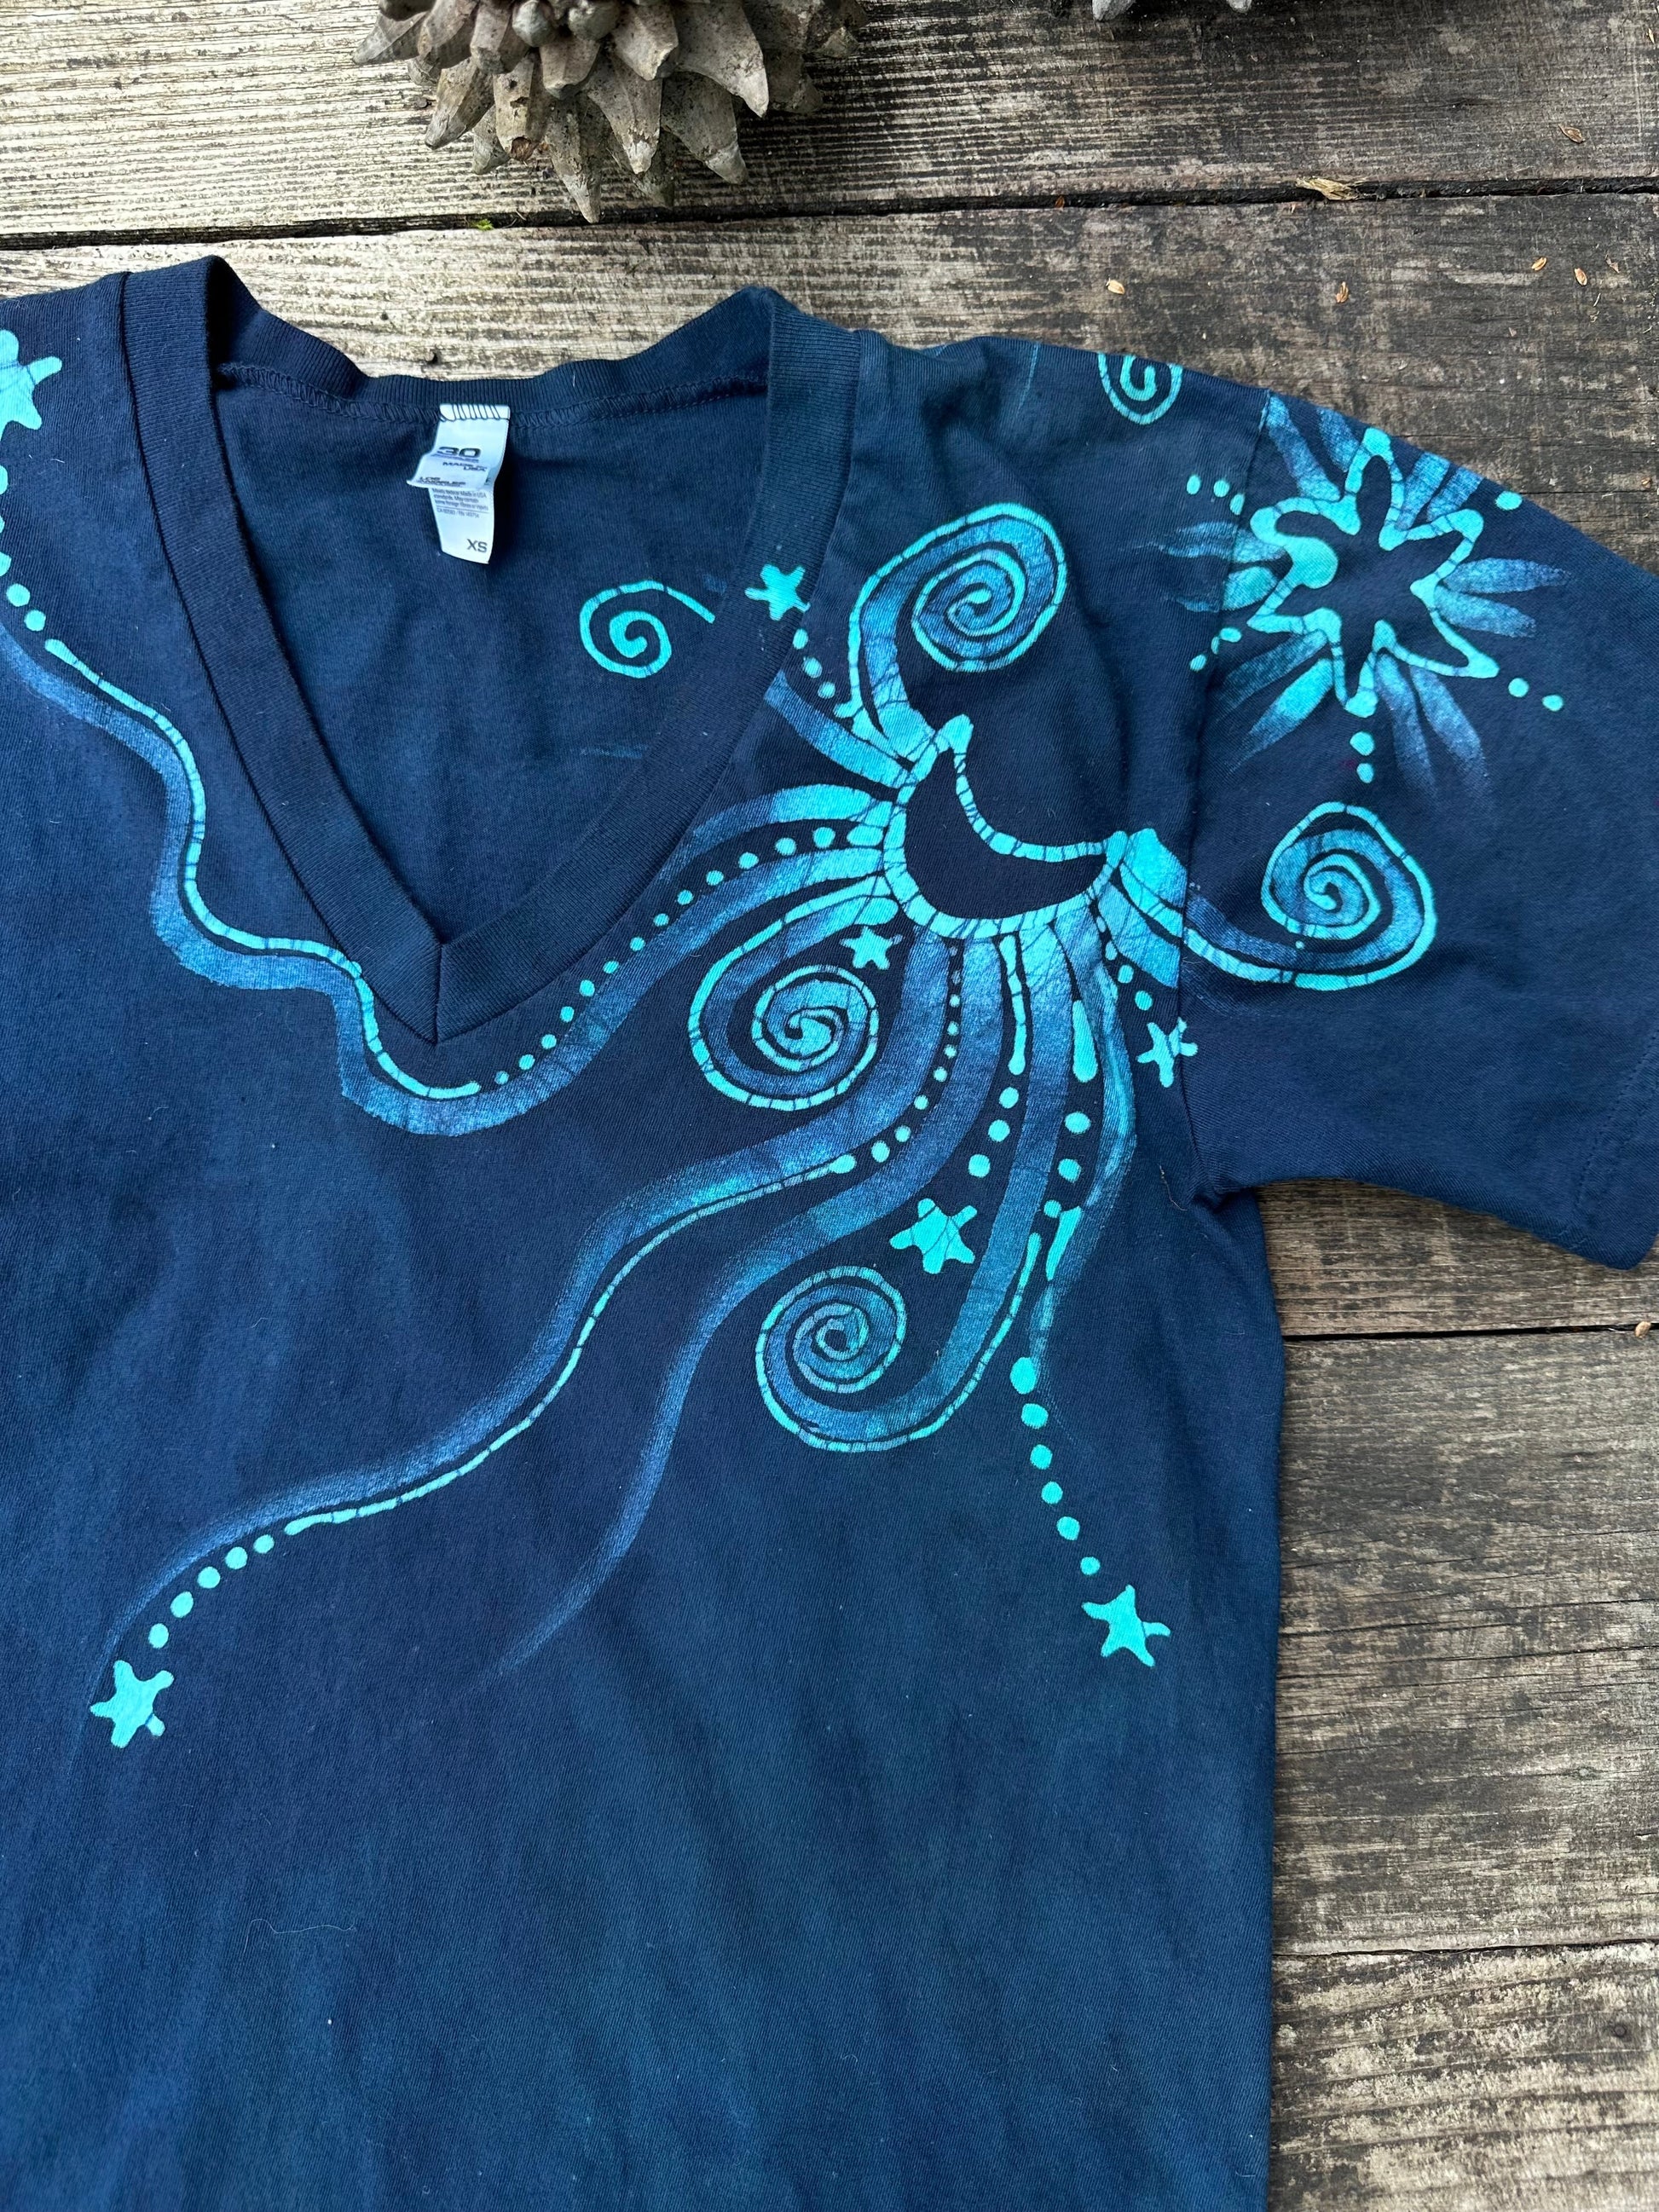 The Stars Will Guide Us Vneck Tee in Blue Teal - Size XS Unisex Tshirts Batikwalla by Victoria 